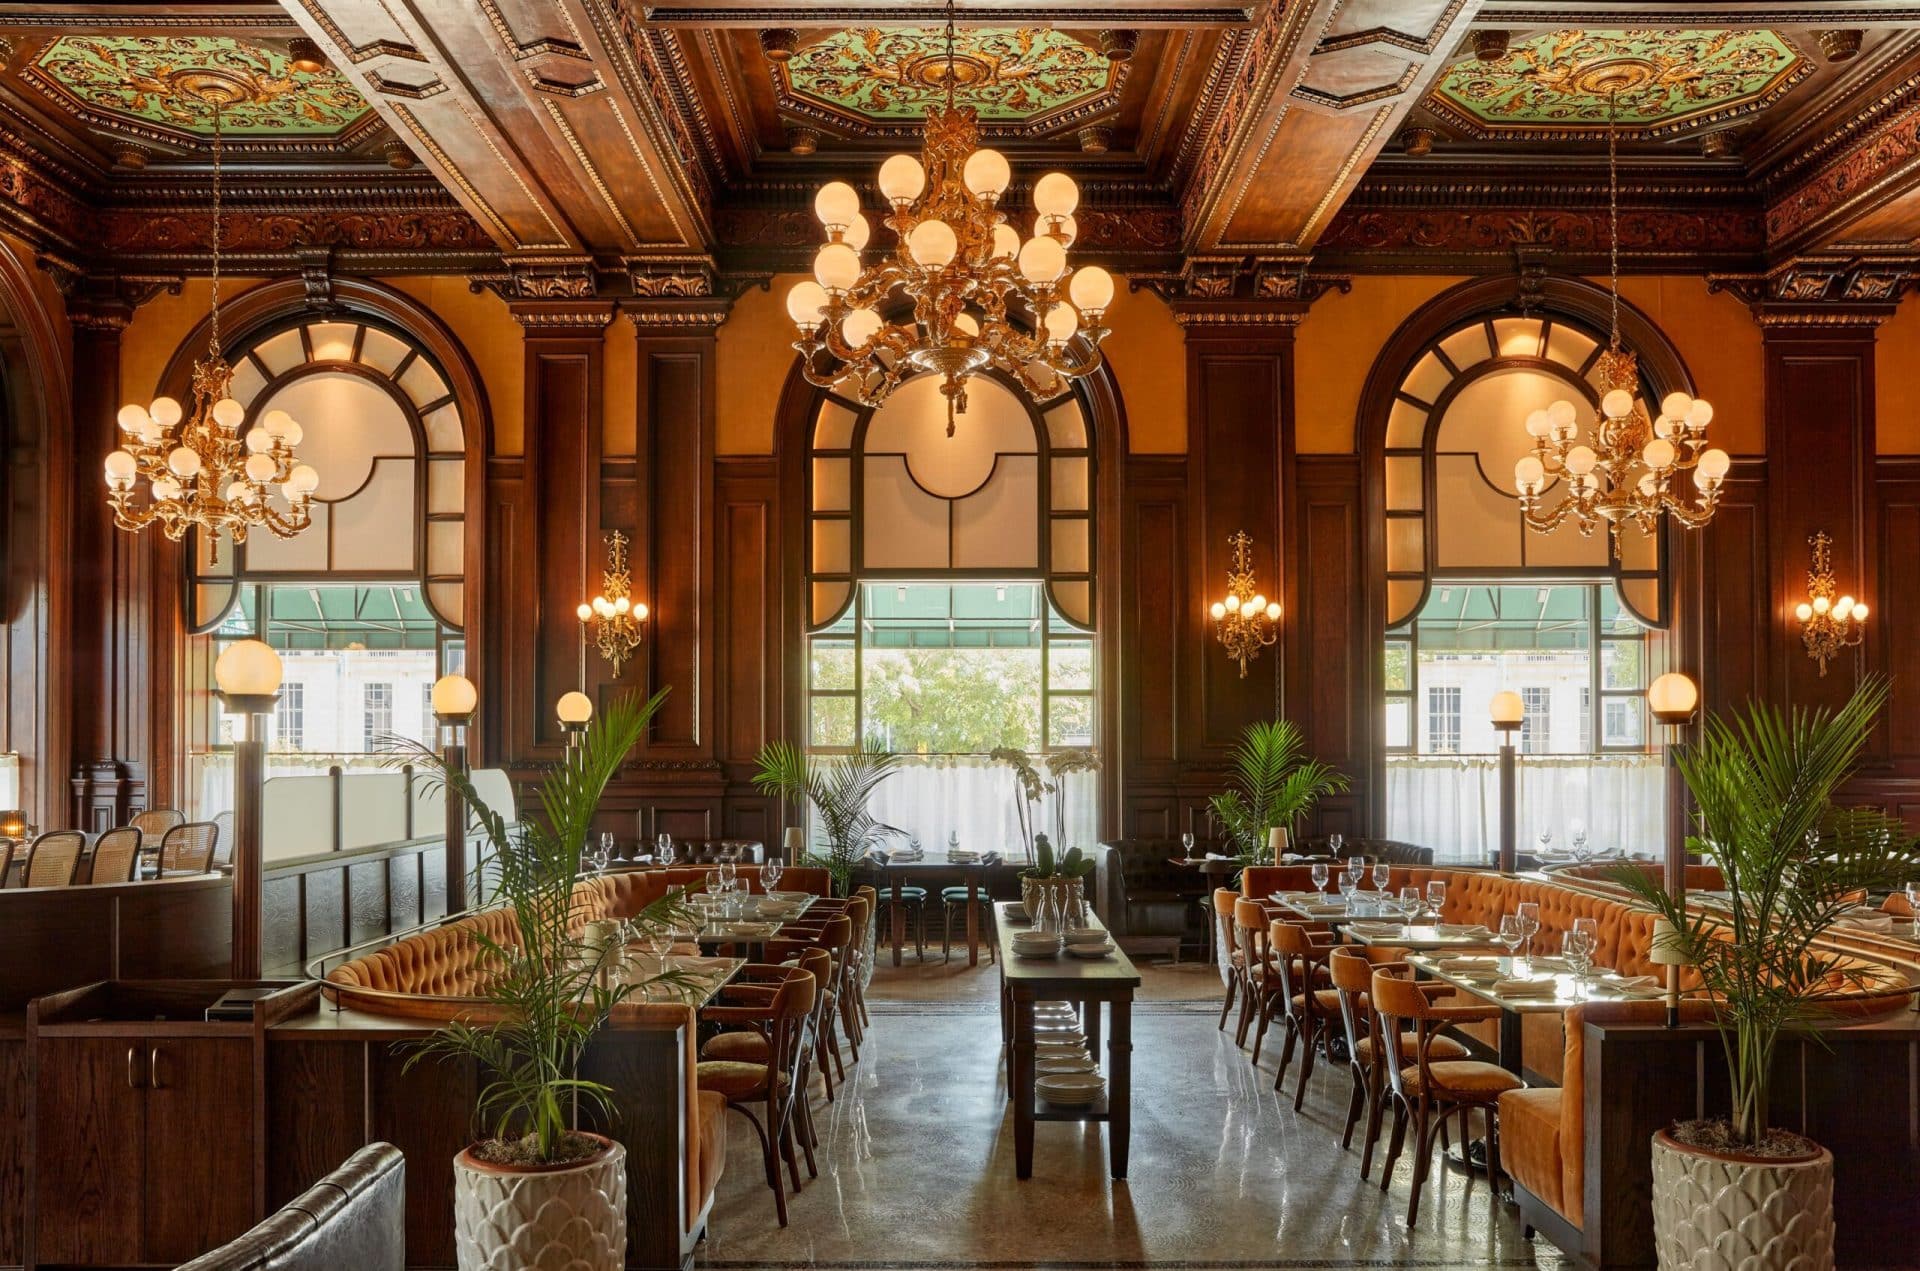 Le Cavalier at The Green Room Receives Historic Hotels of America Best Historic Restaurant Award